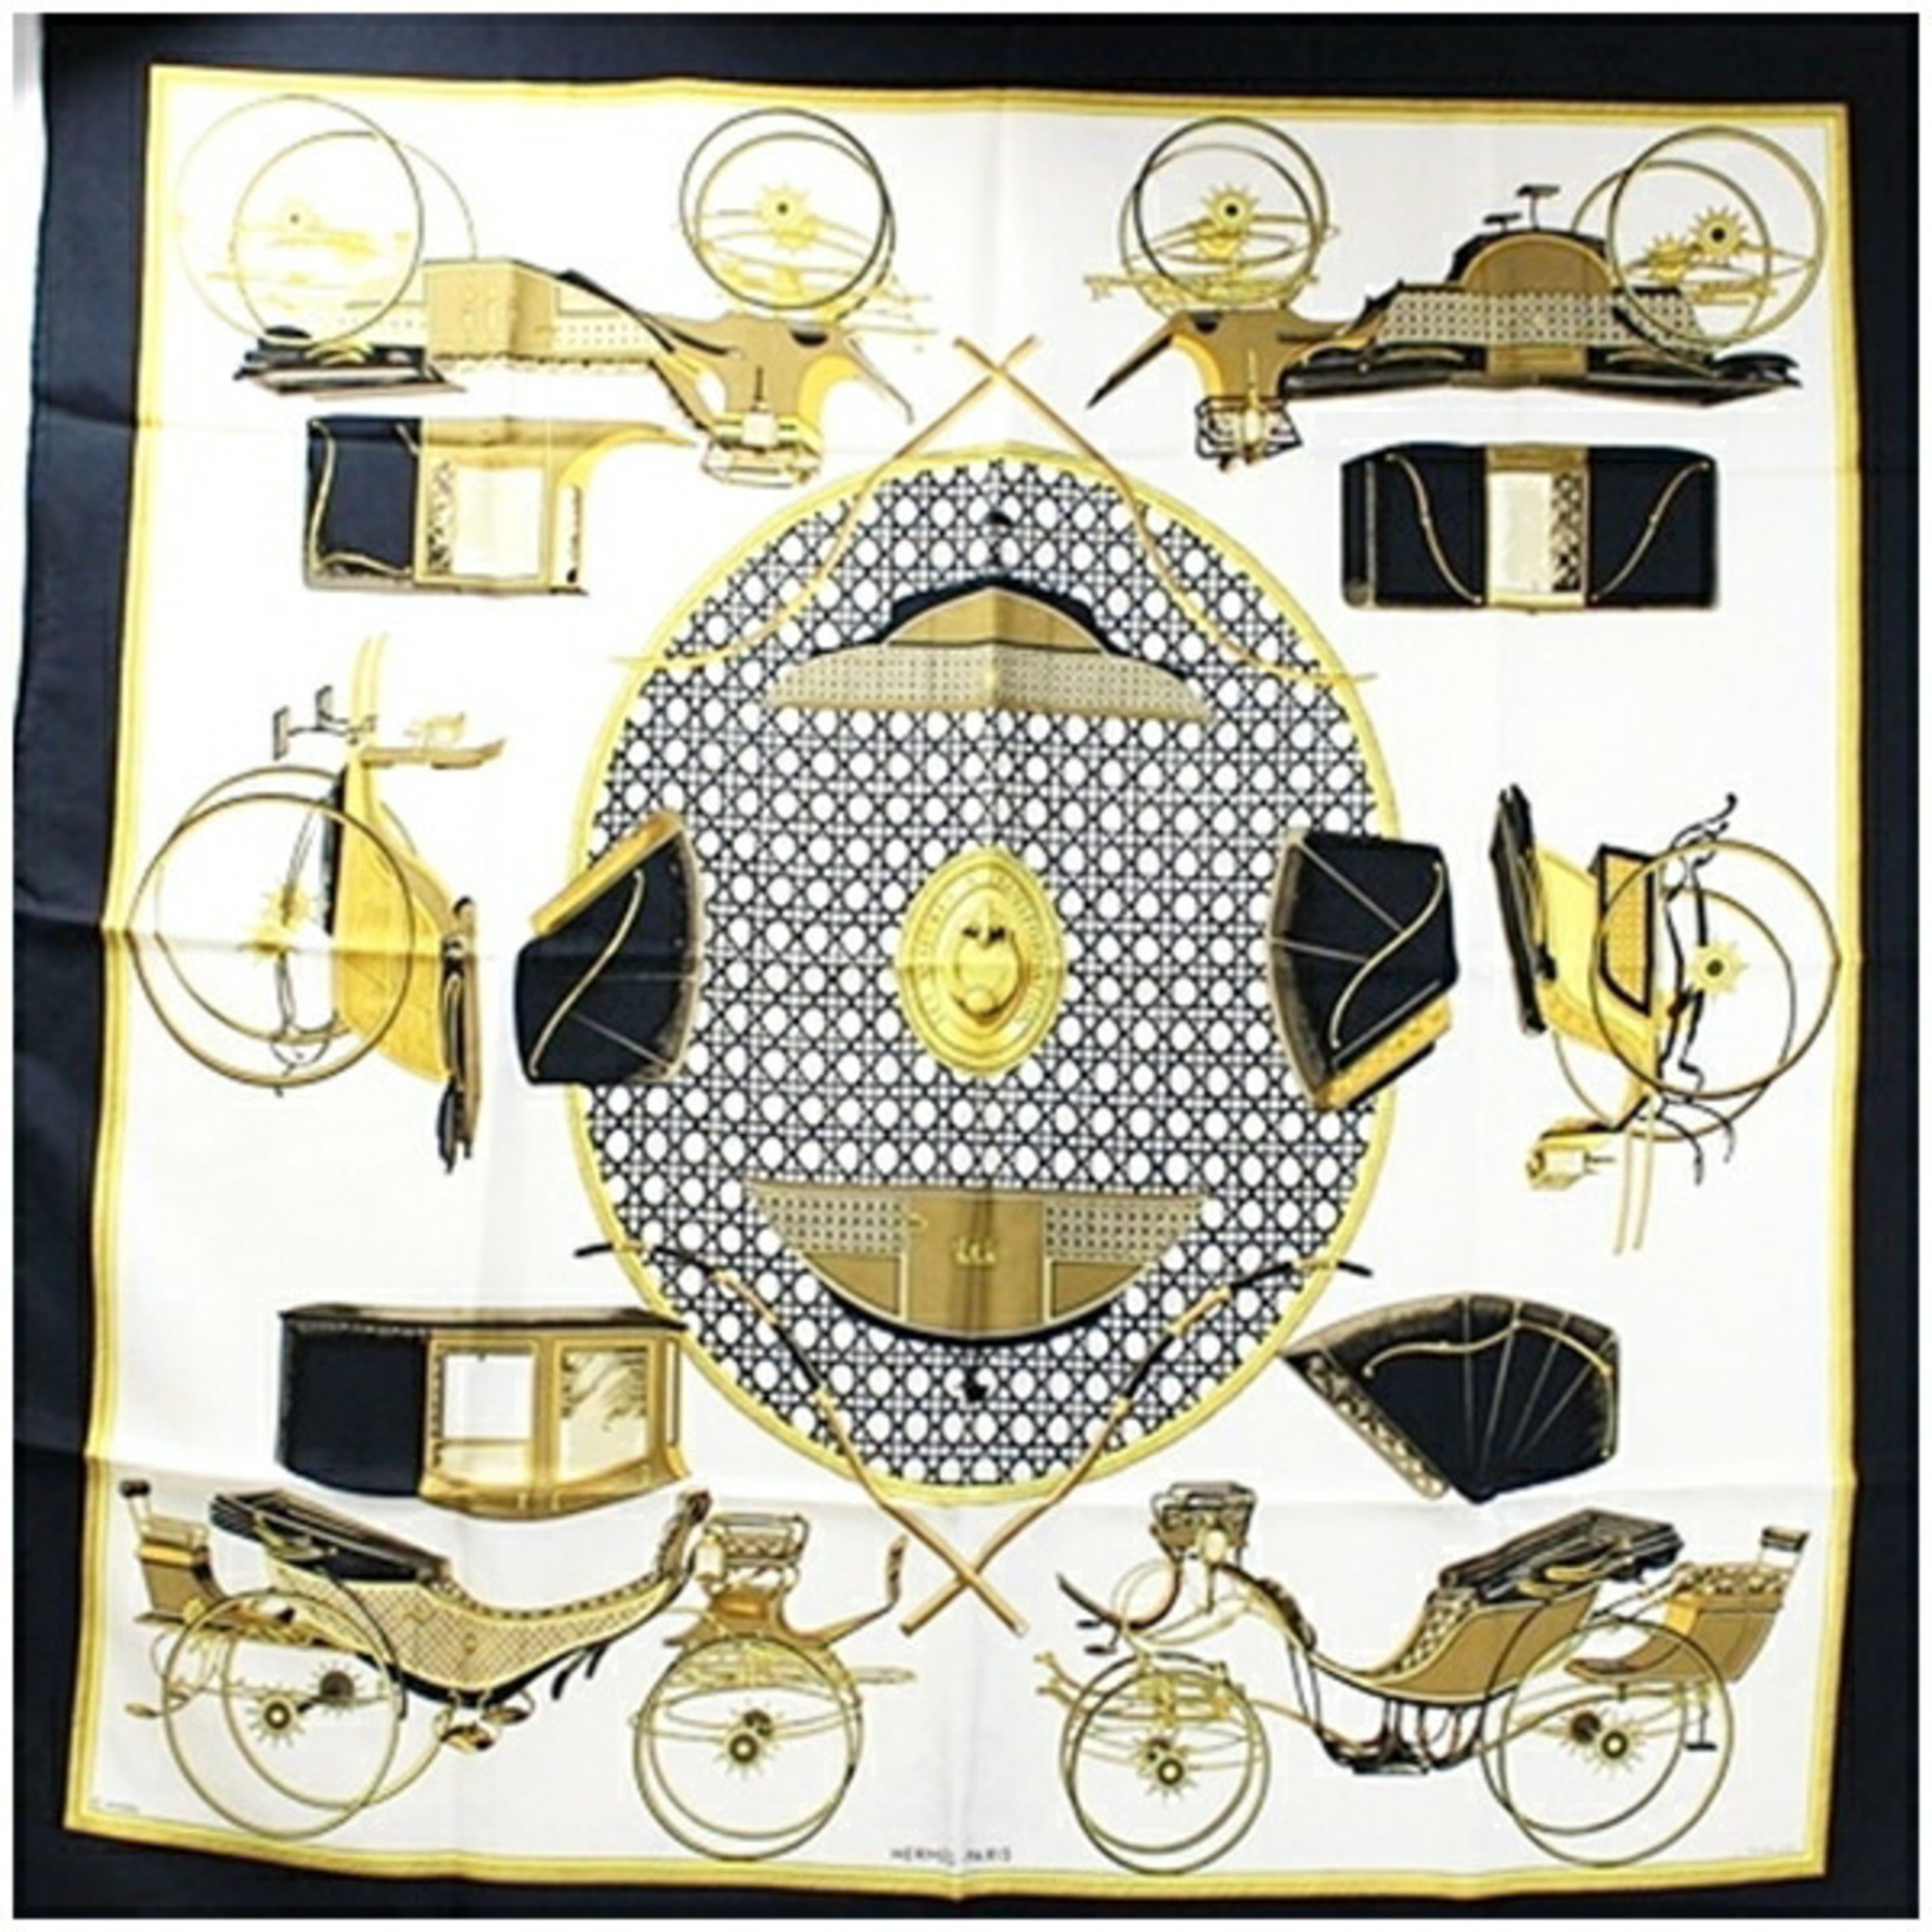 Hermes scarf muffler Carre 90 "LES VOITURES A TANSFORMATION" Folding hood carriage White x Black HERMES Women's